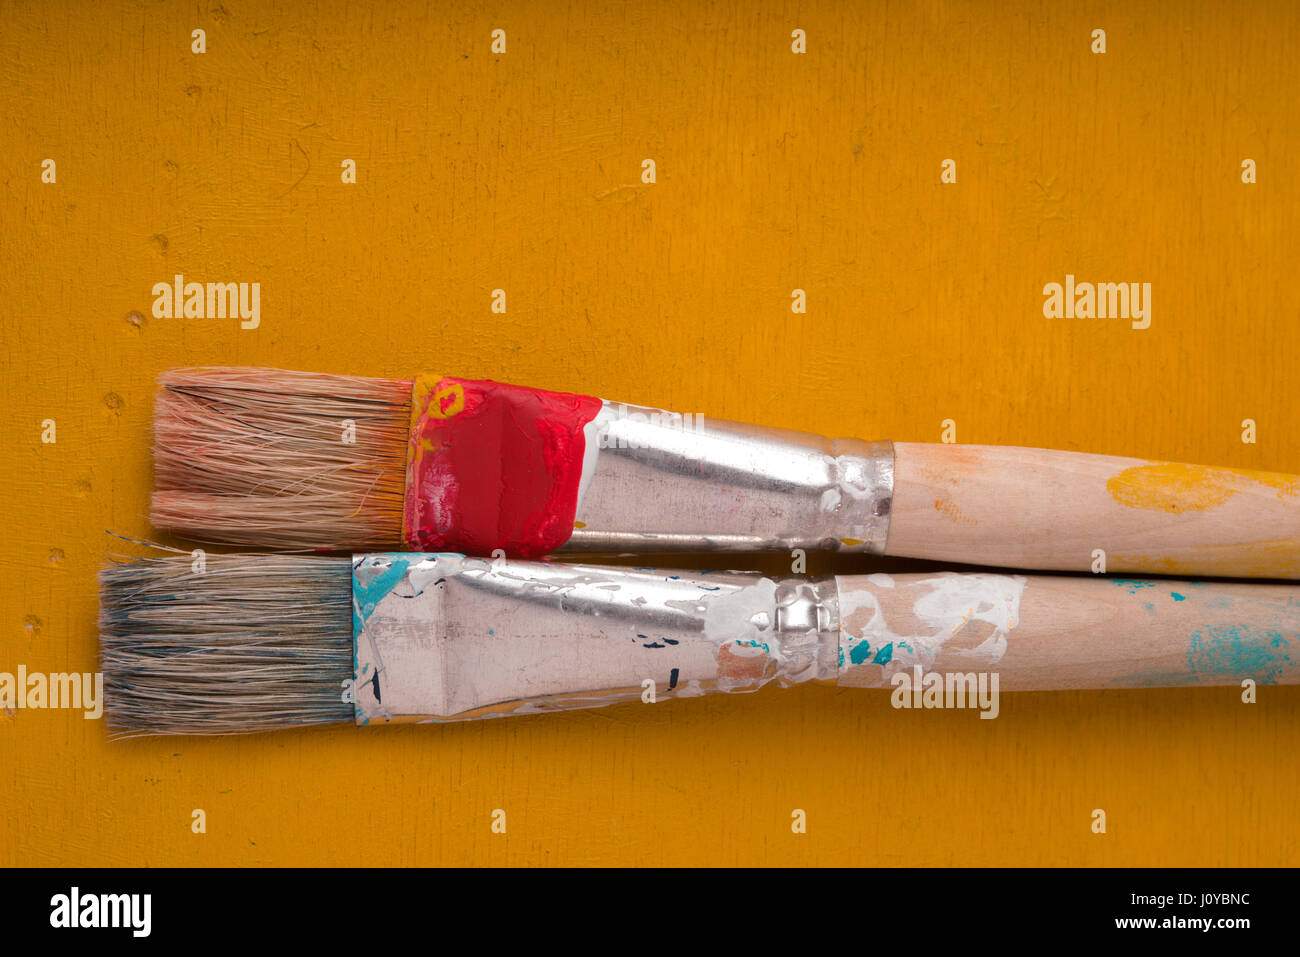 A close up of paint and brushes on a table Image & Design ID 0000370069 